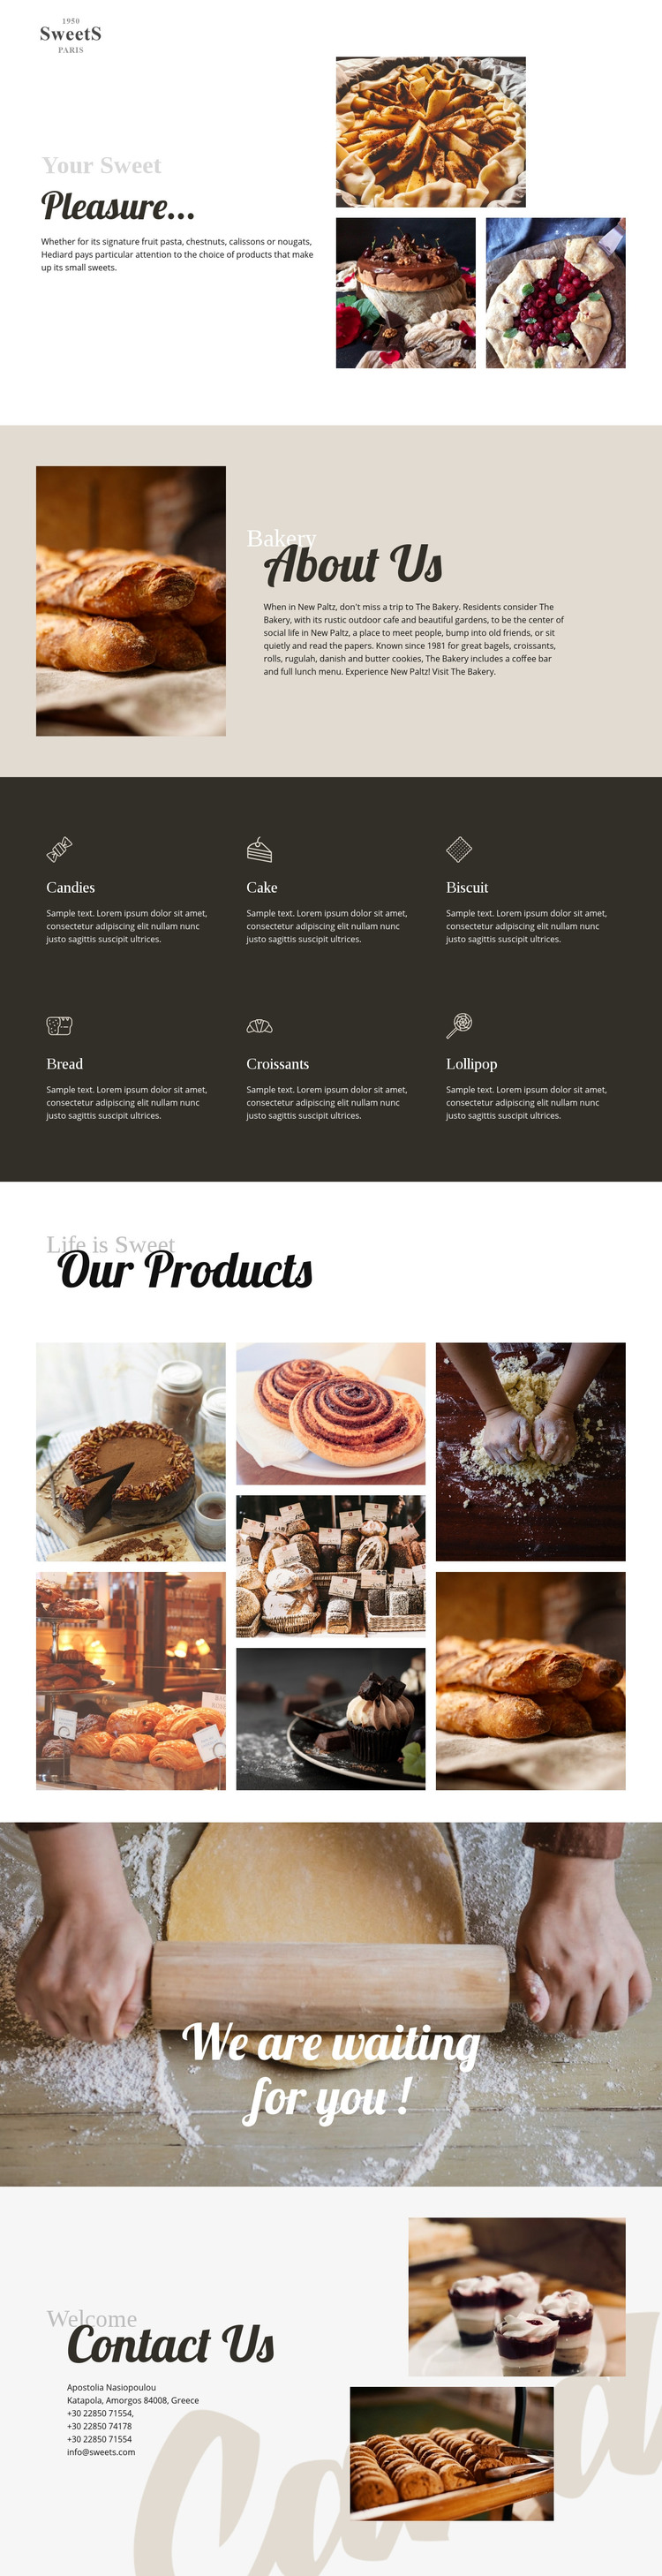 Cakes and baking food Homepage Design